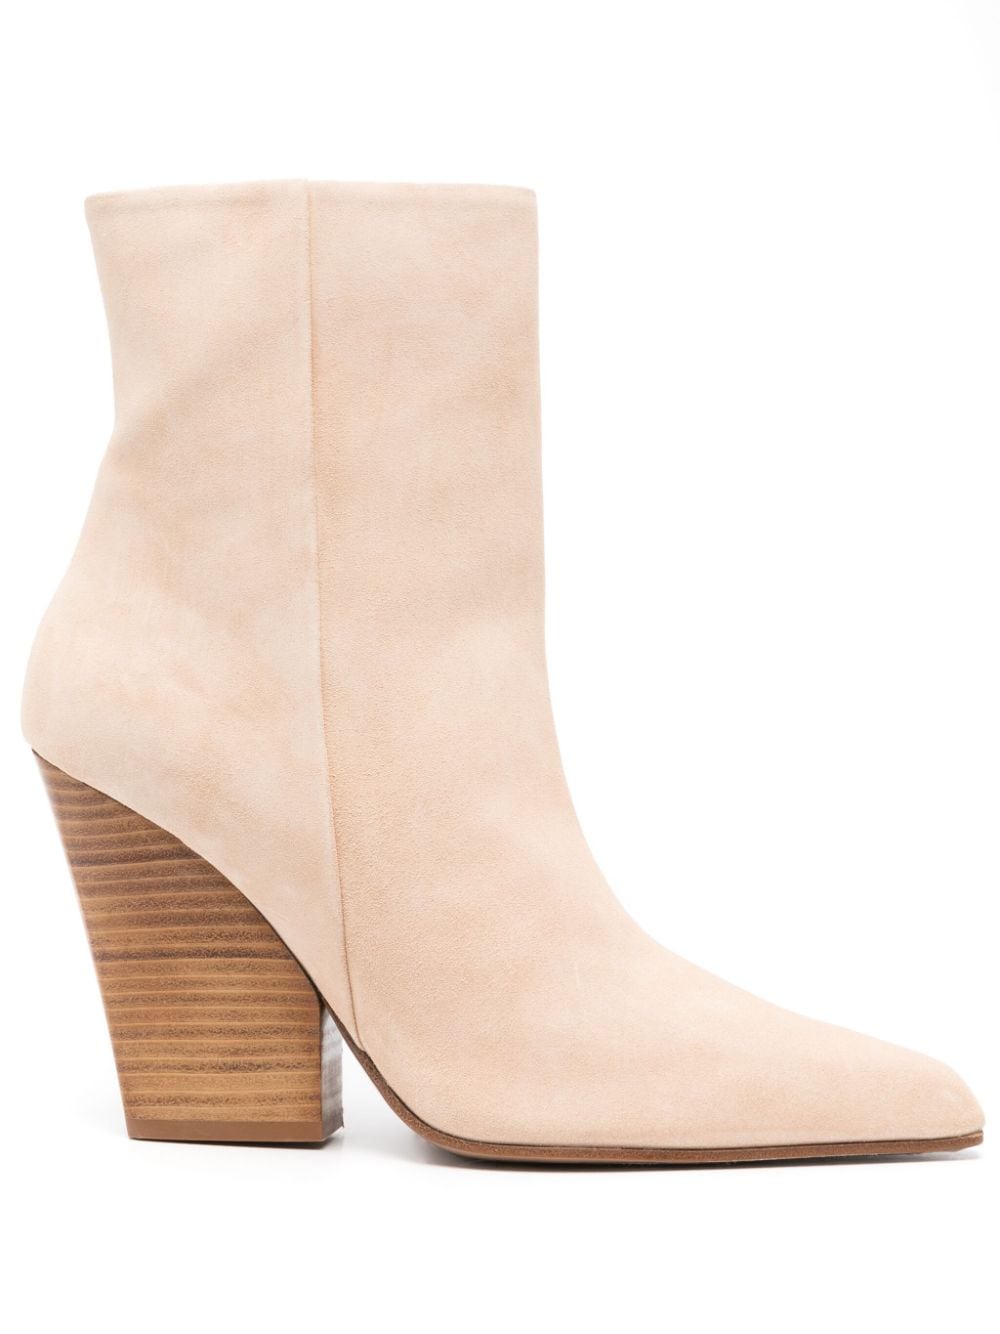 Paris Texas Ankle-length Suede Boots In Neutrals